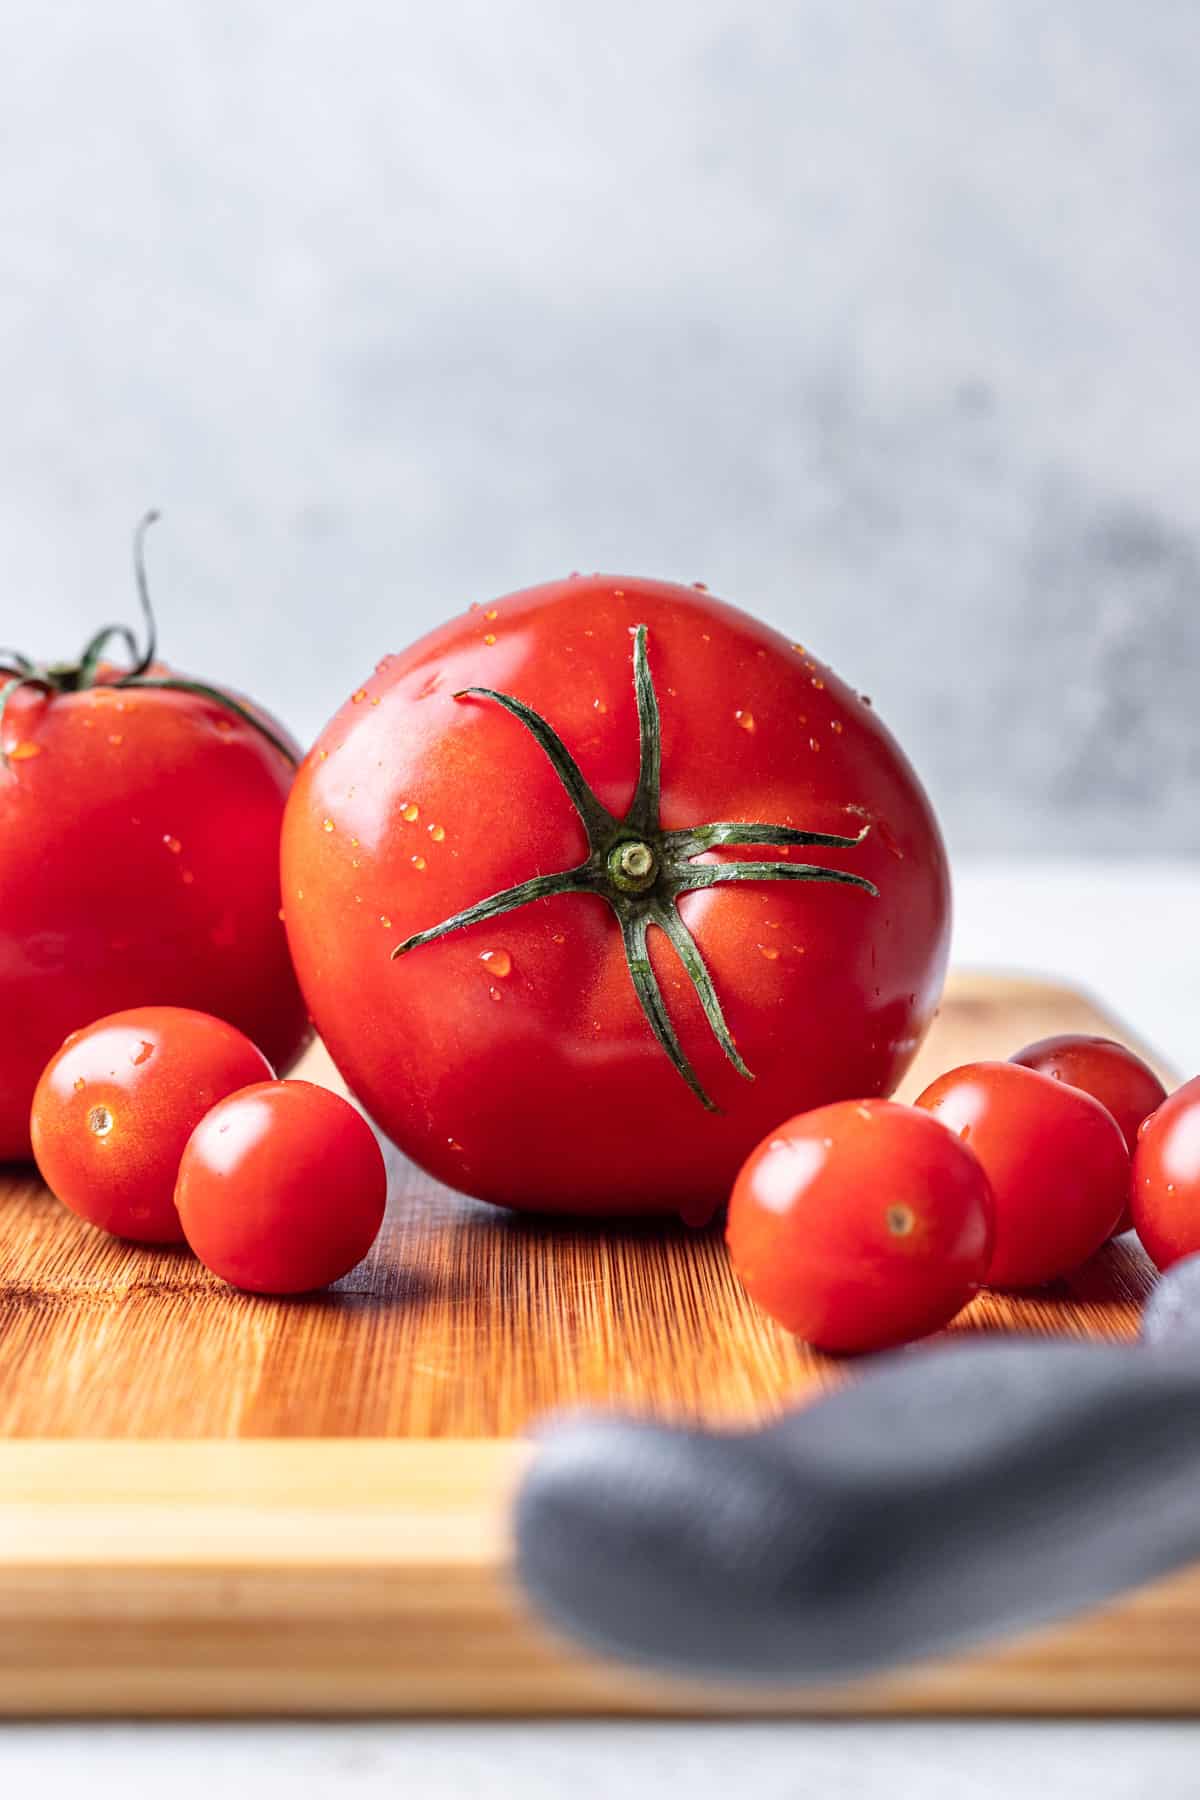 Tomatoes on a wood cutting board.